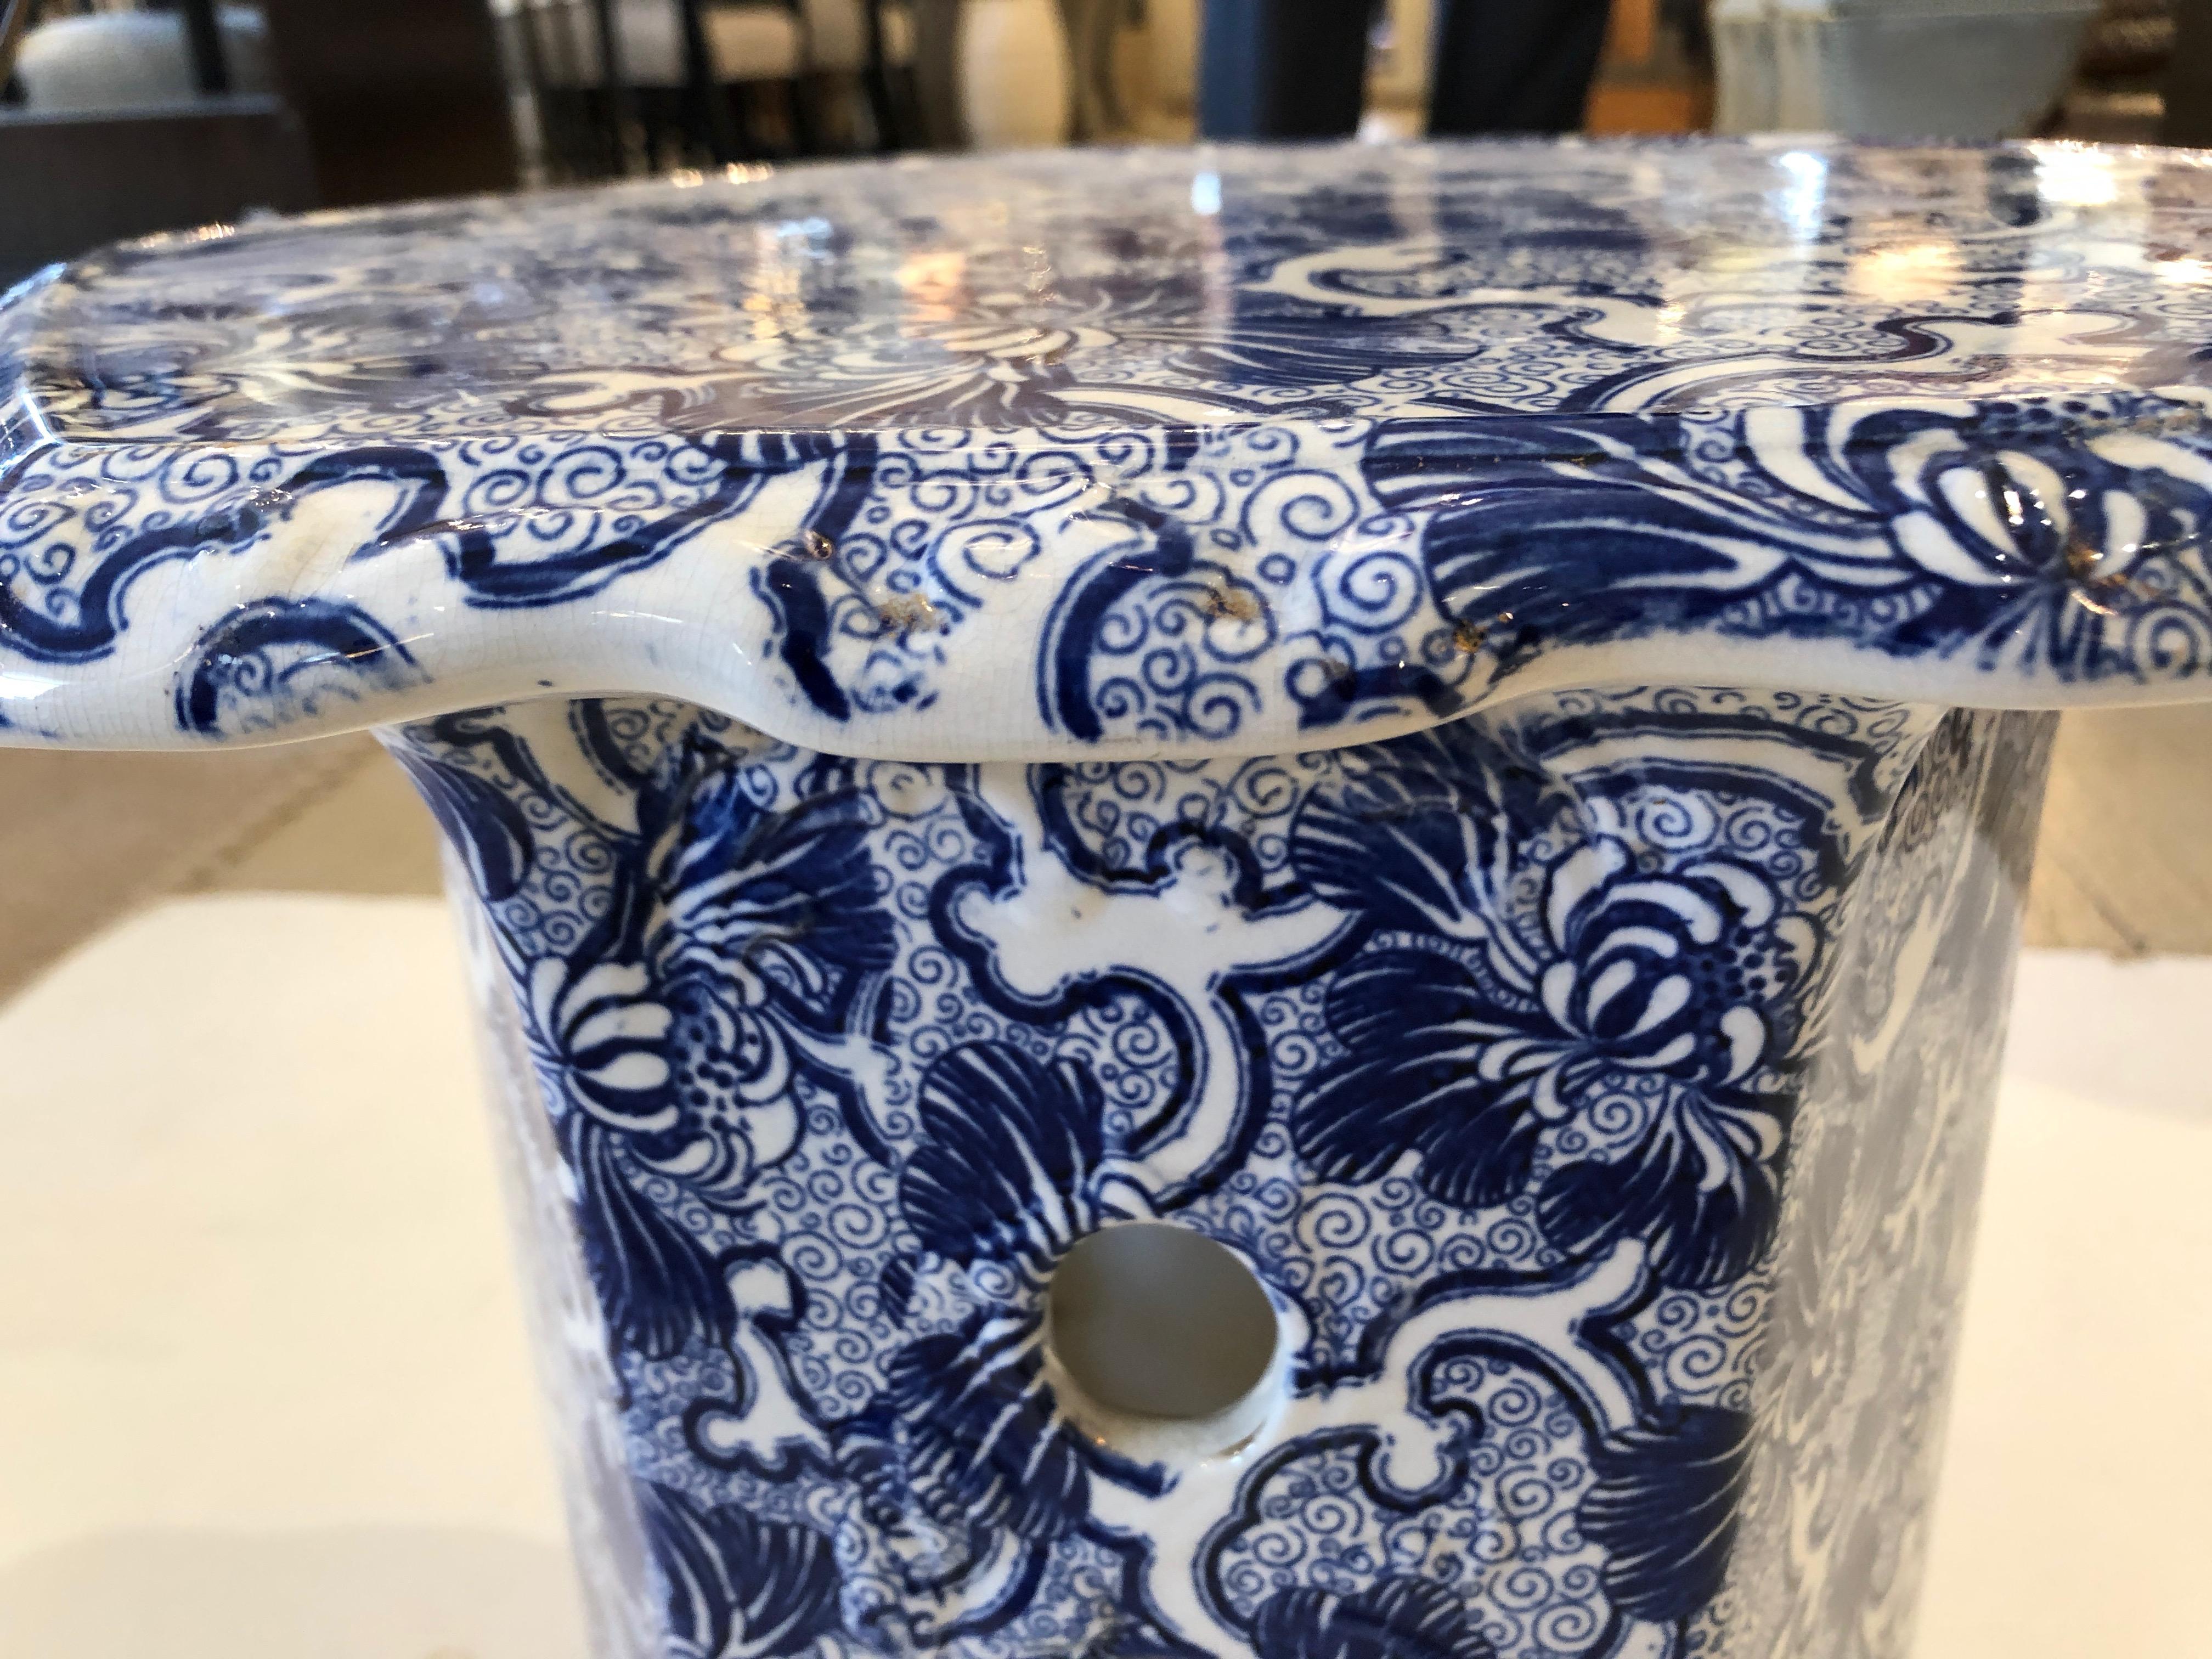 A gem of an antique 19th century English garden seat having 6 sides that are scallopped on the edges. The pattern is an intricate gorgeous blue and white and there are pretty openings on the sides of the table. Makes a superb drinks table or little